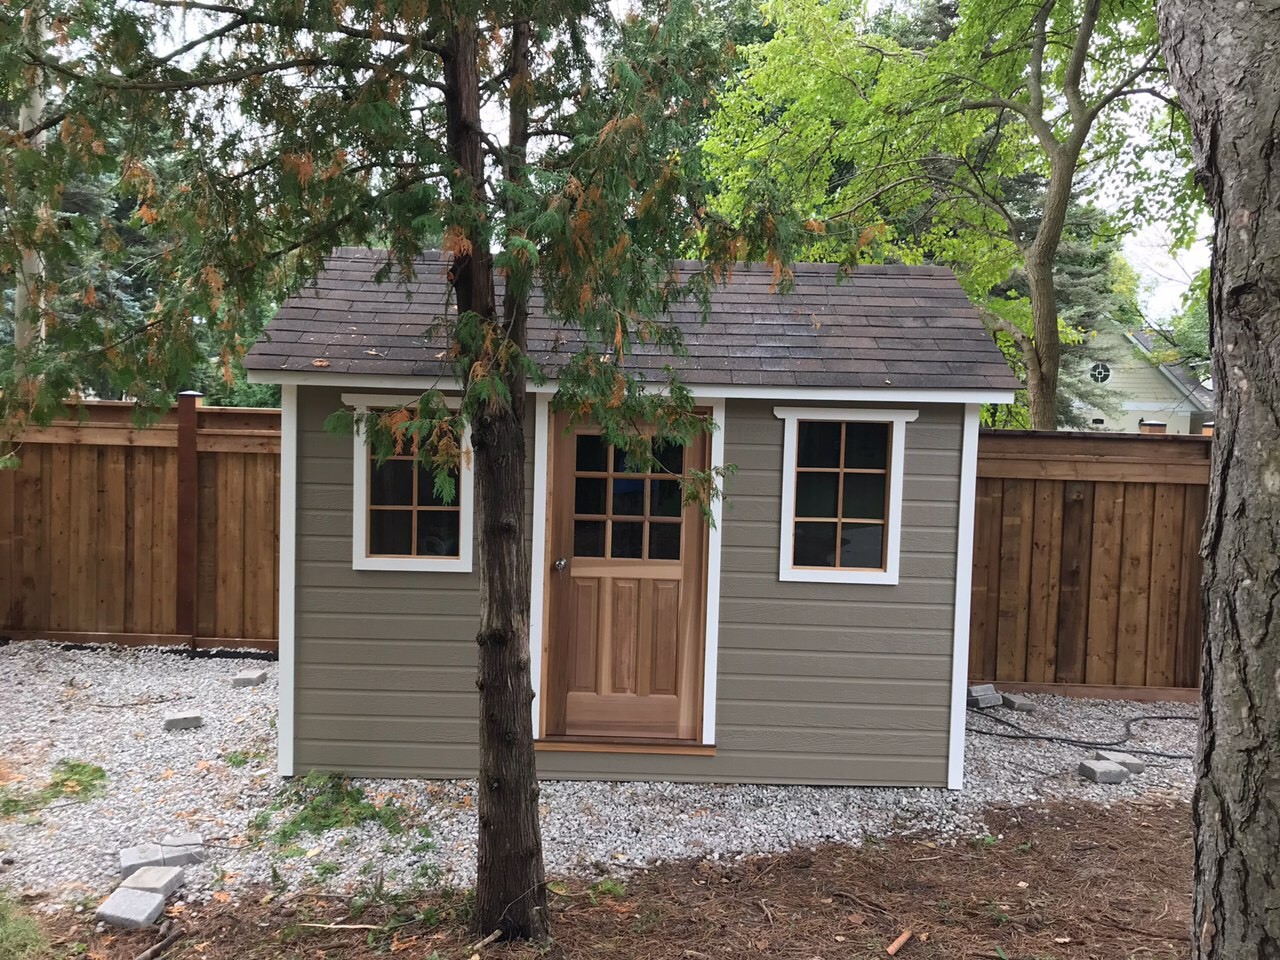 Trim Palmerston 8x12 shed kit with fixed windows  in Thornhill Ontario. ID number 232124-3